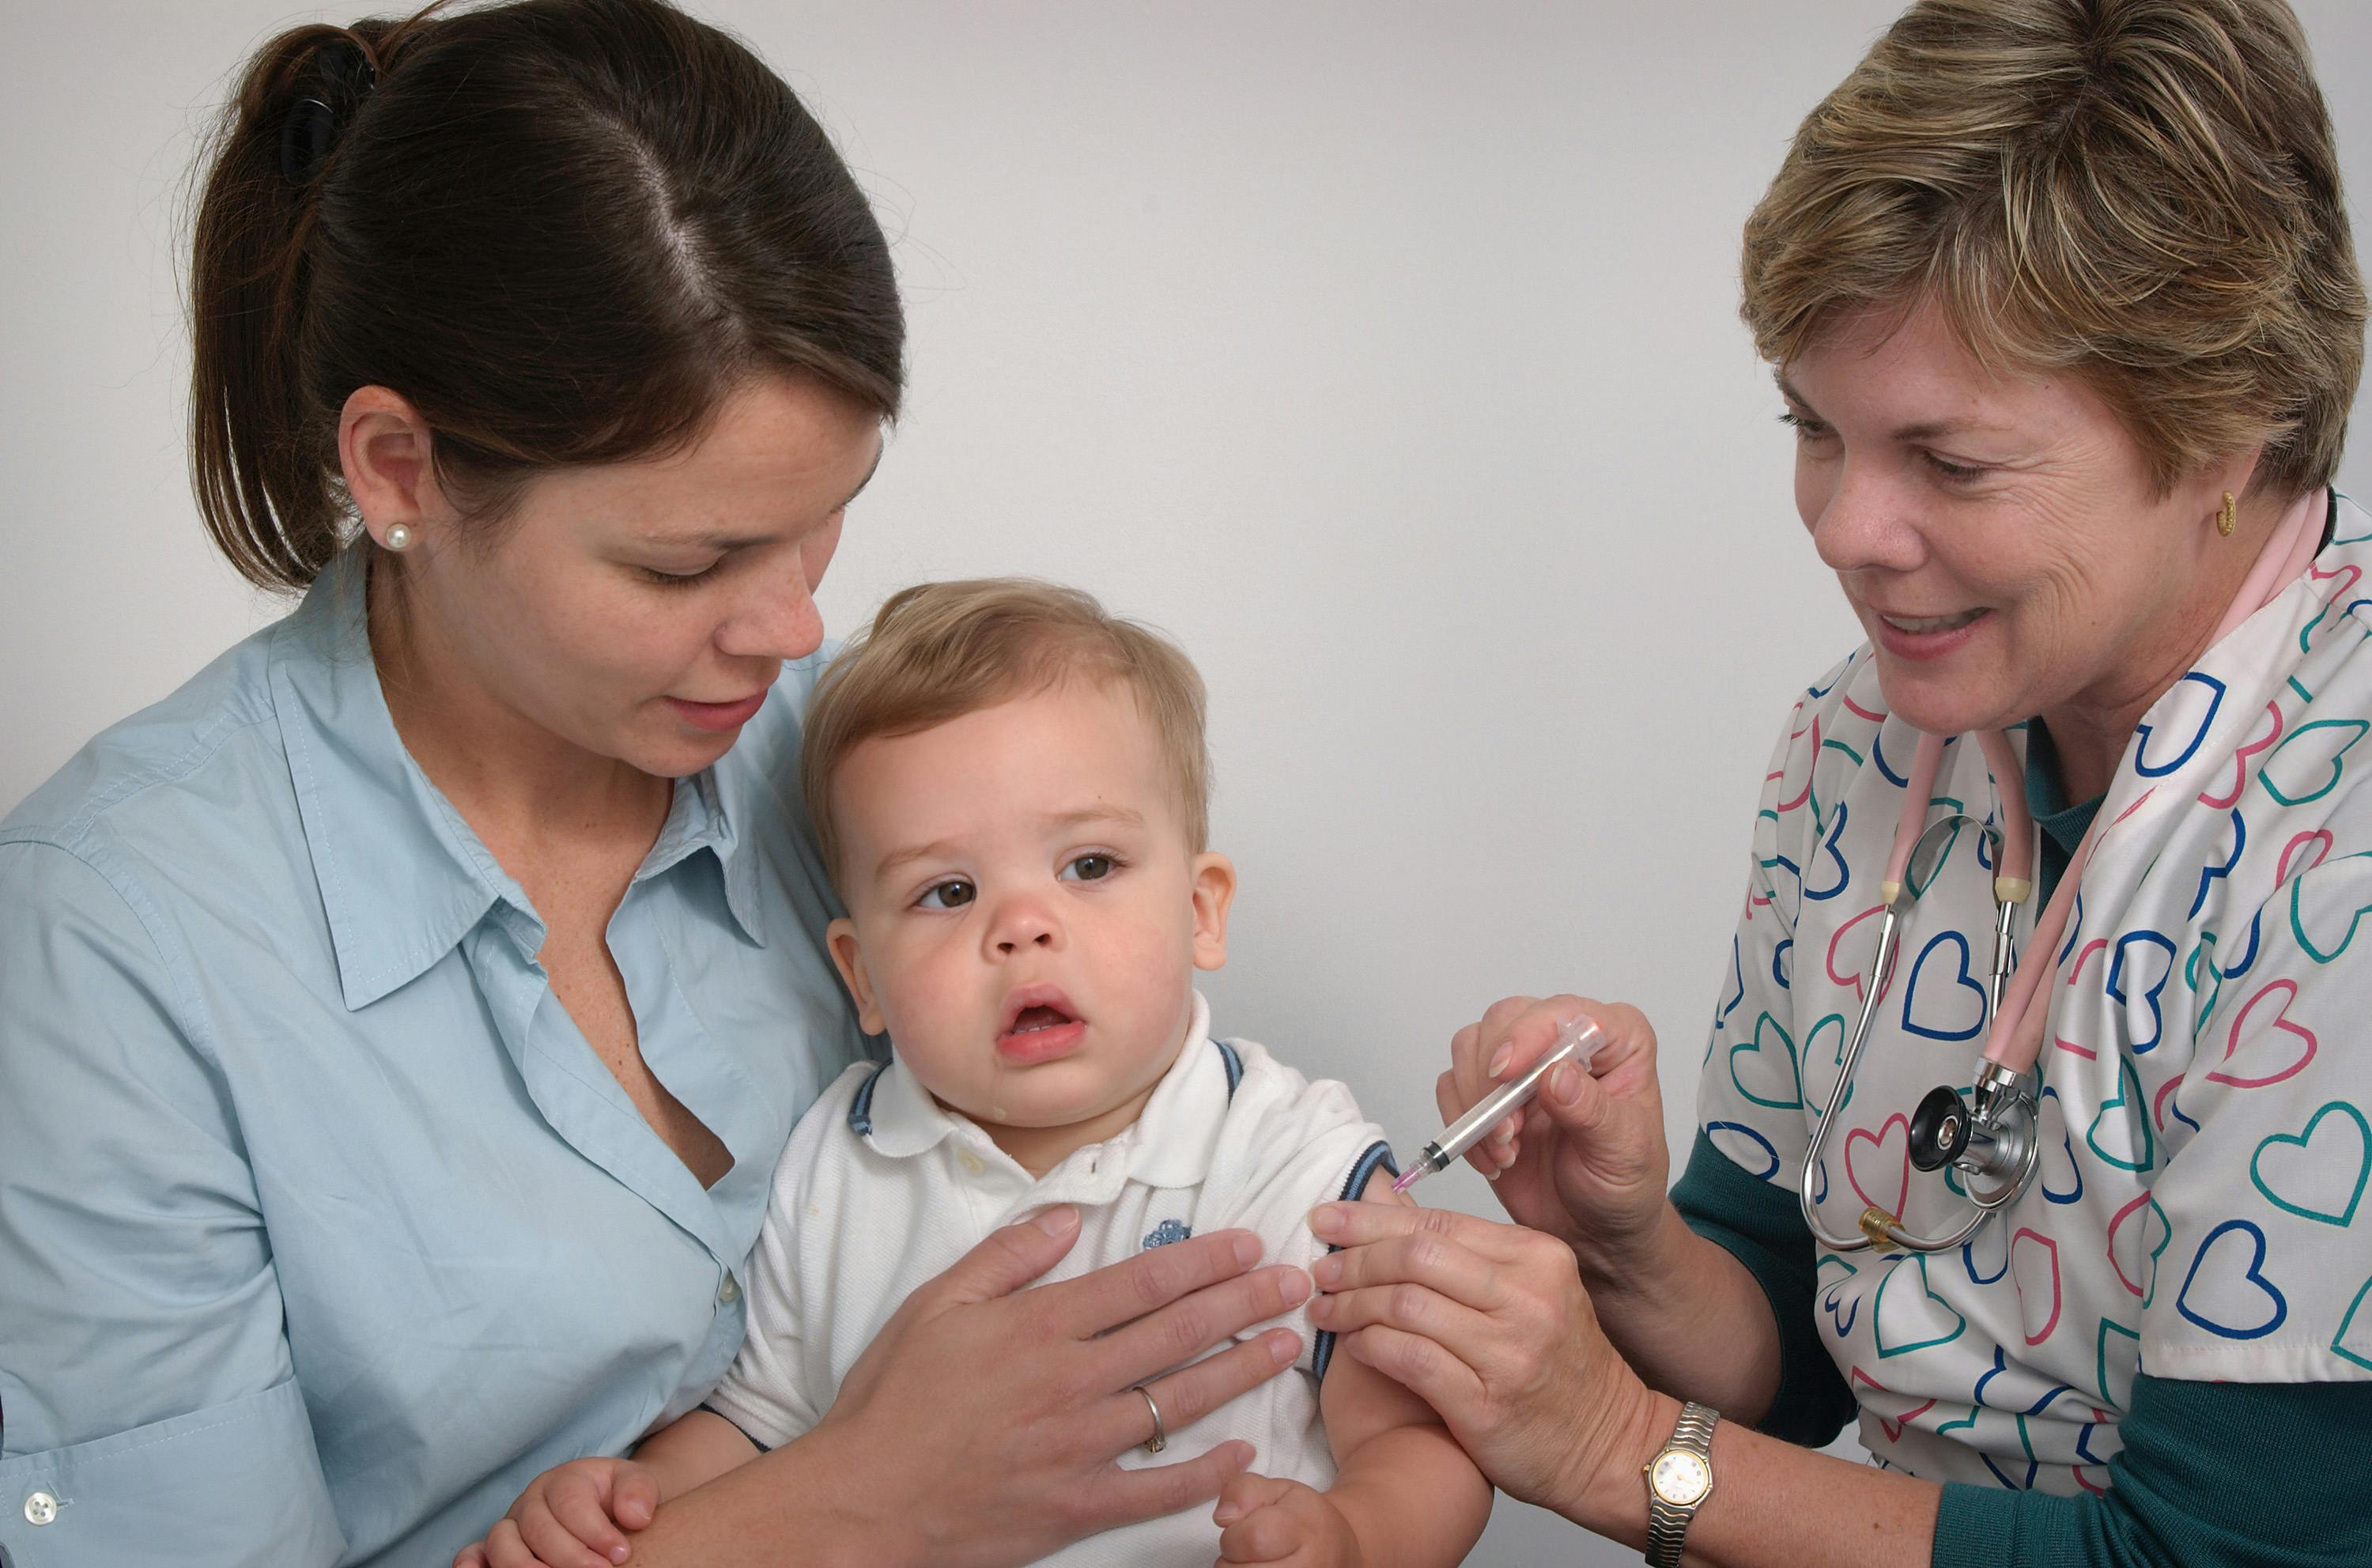 Baby or toddler receiving an immunization from a doctor while being held by parent